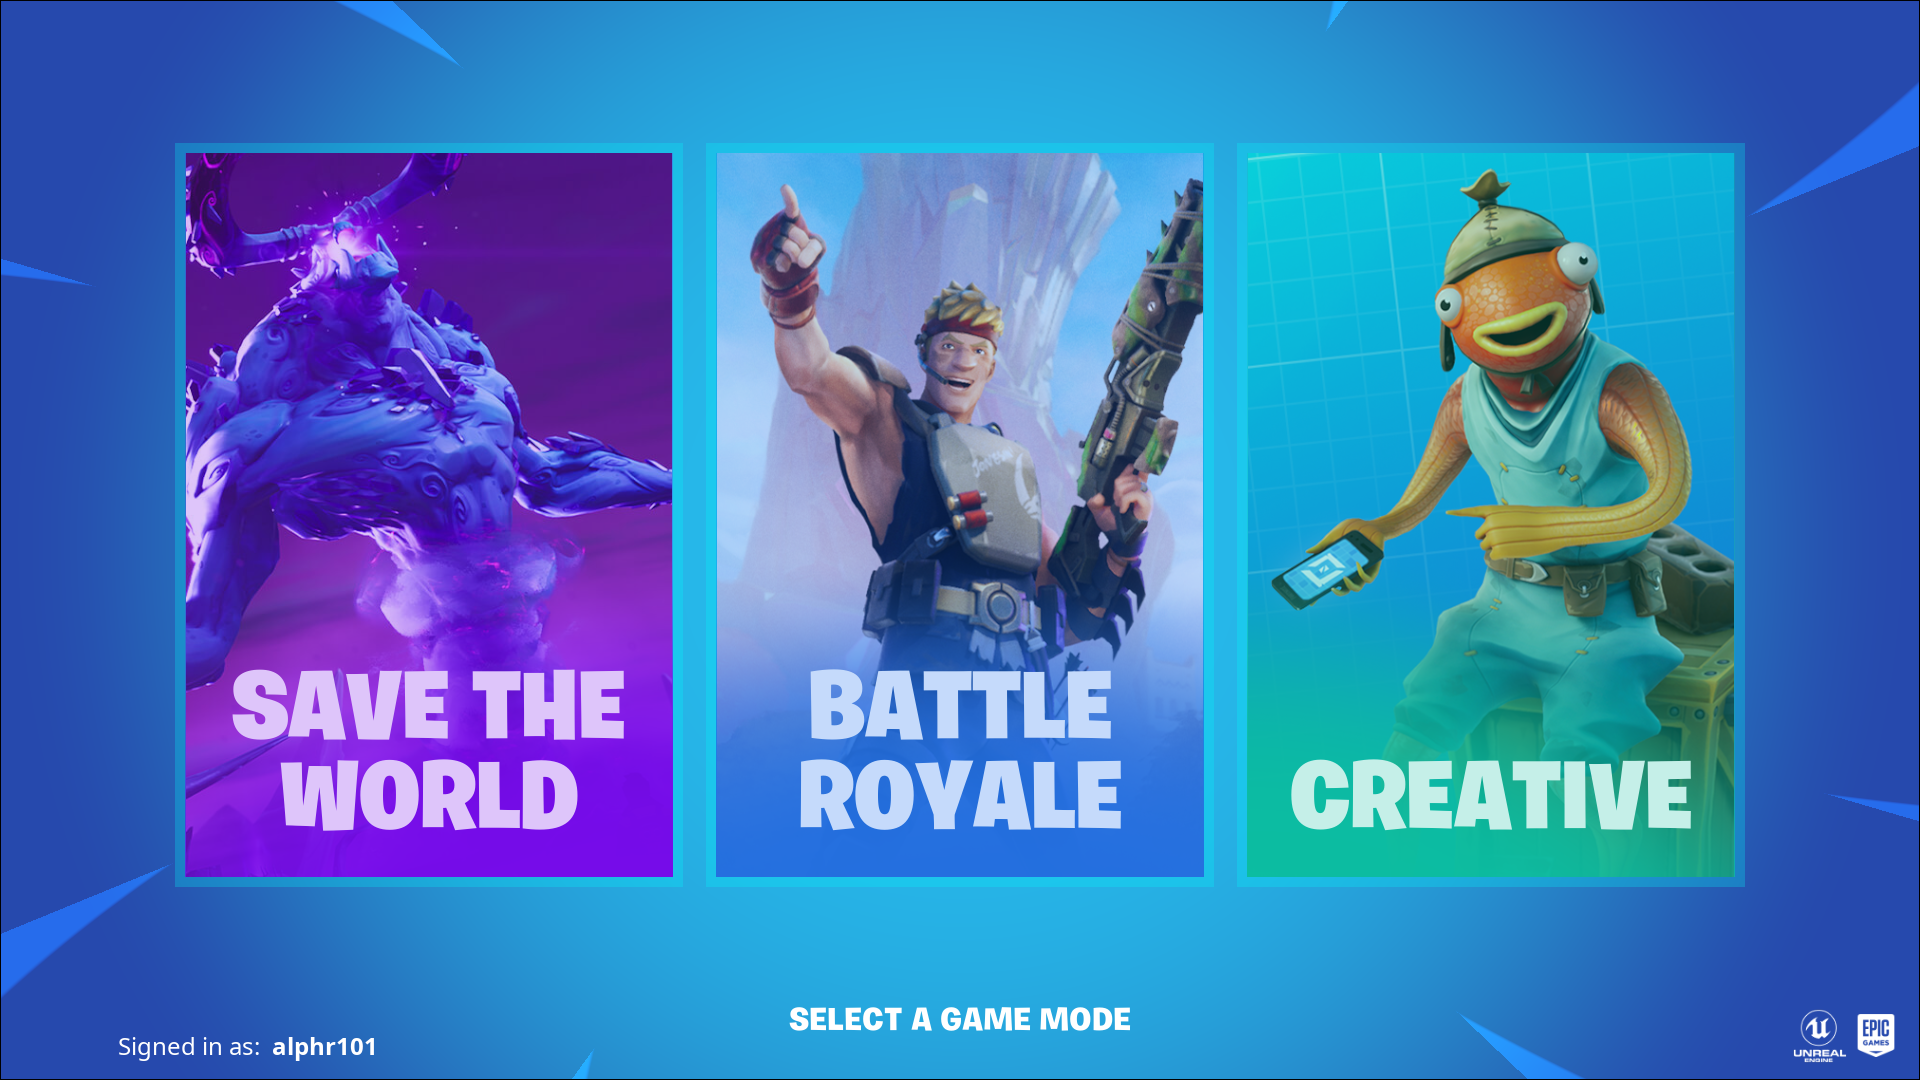 Opinion] Fortnite feels more like a playable ad than a game - Inven Global